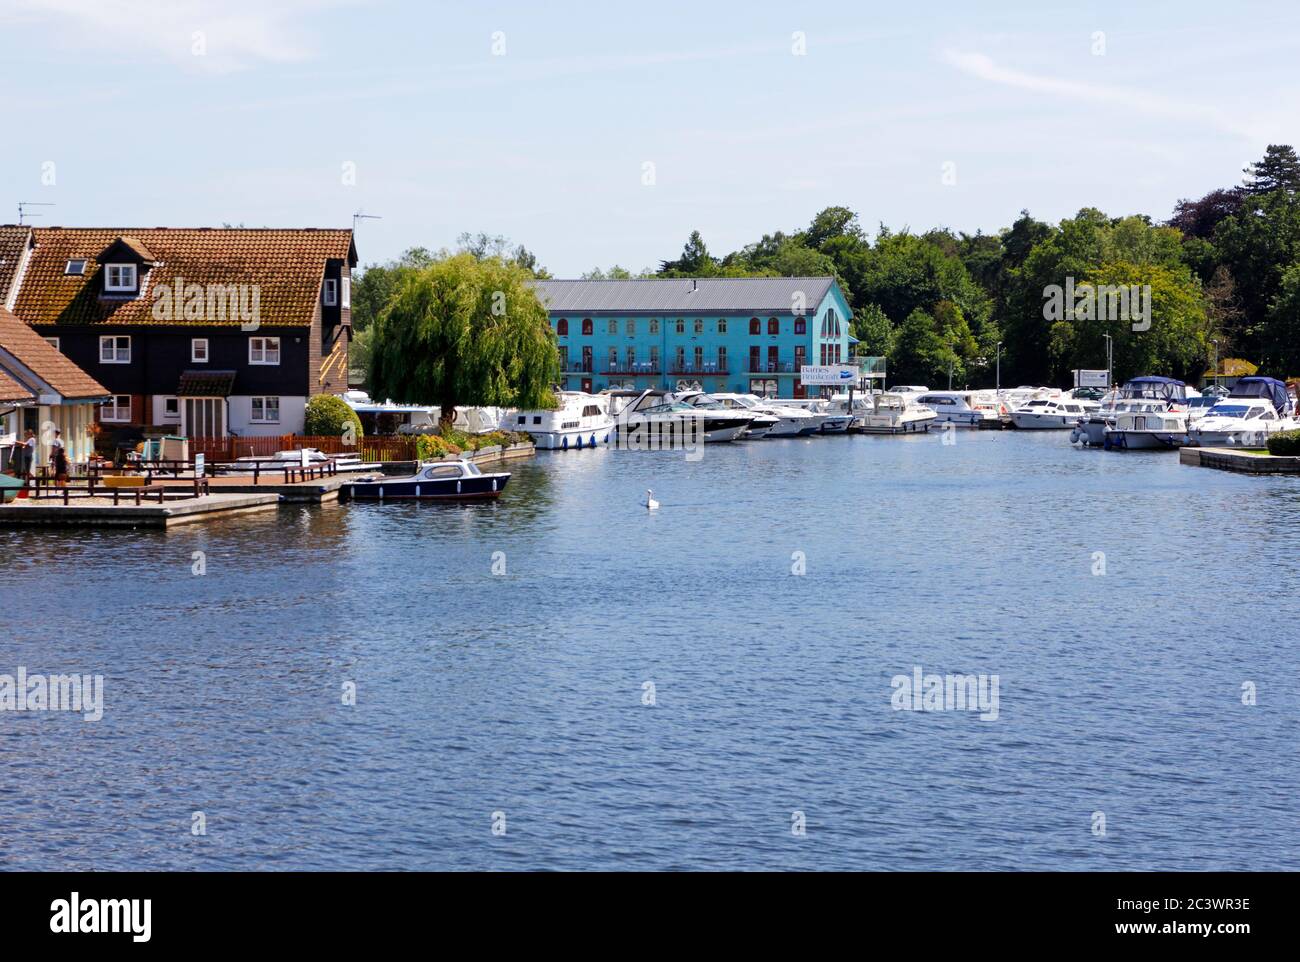 A view of the River Bure with boatyards on the Norfolk Broads at Wroxham, Norfolk, England, United Kingdom, Europe. Stock Photo